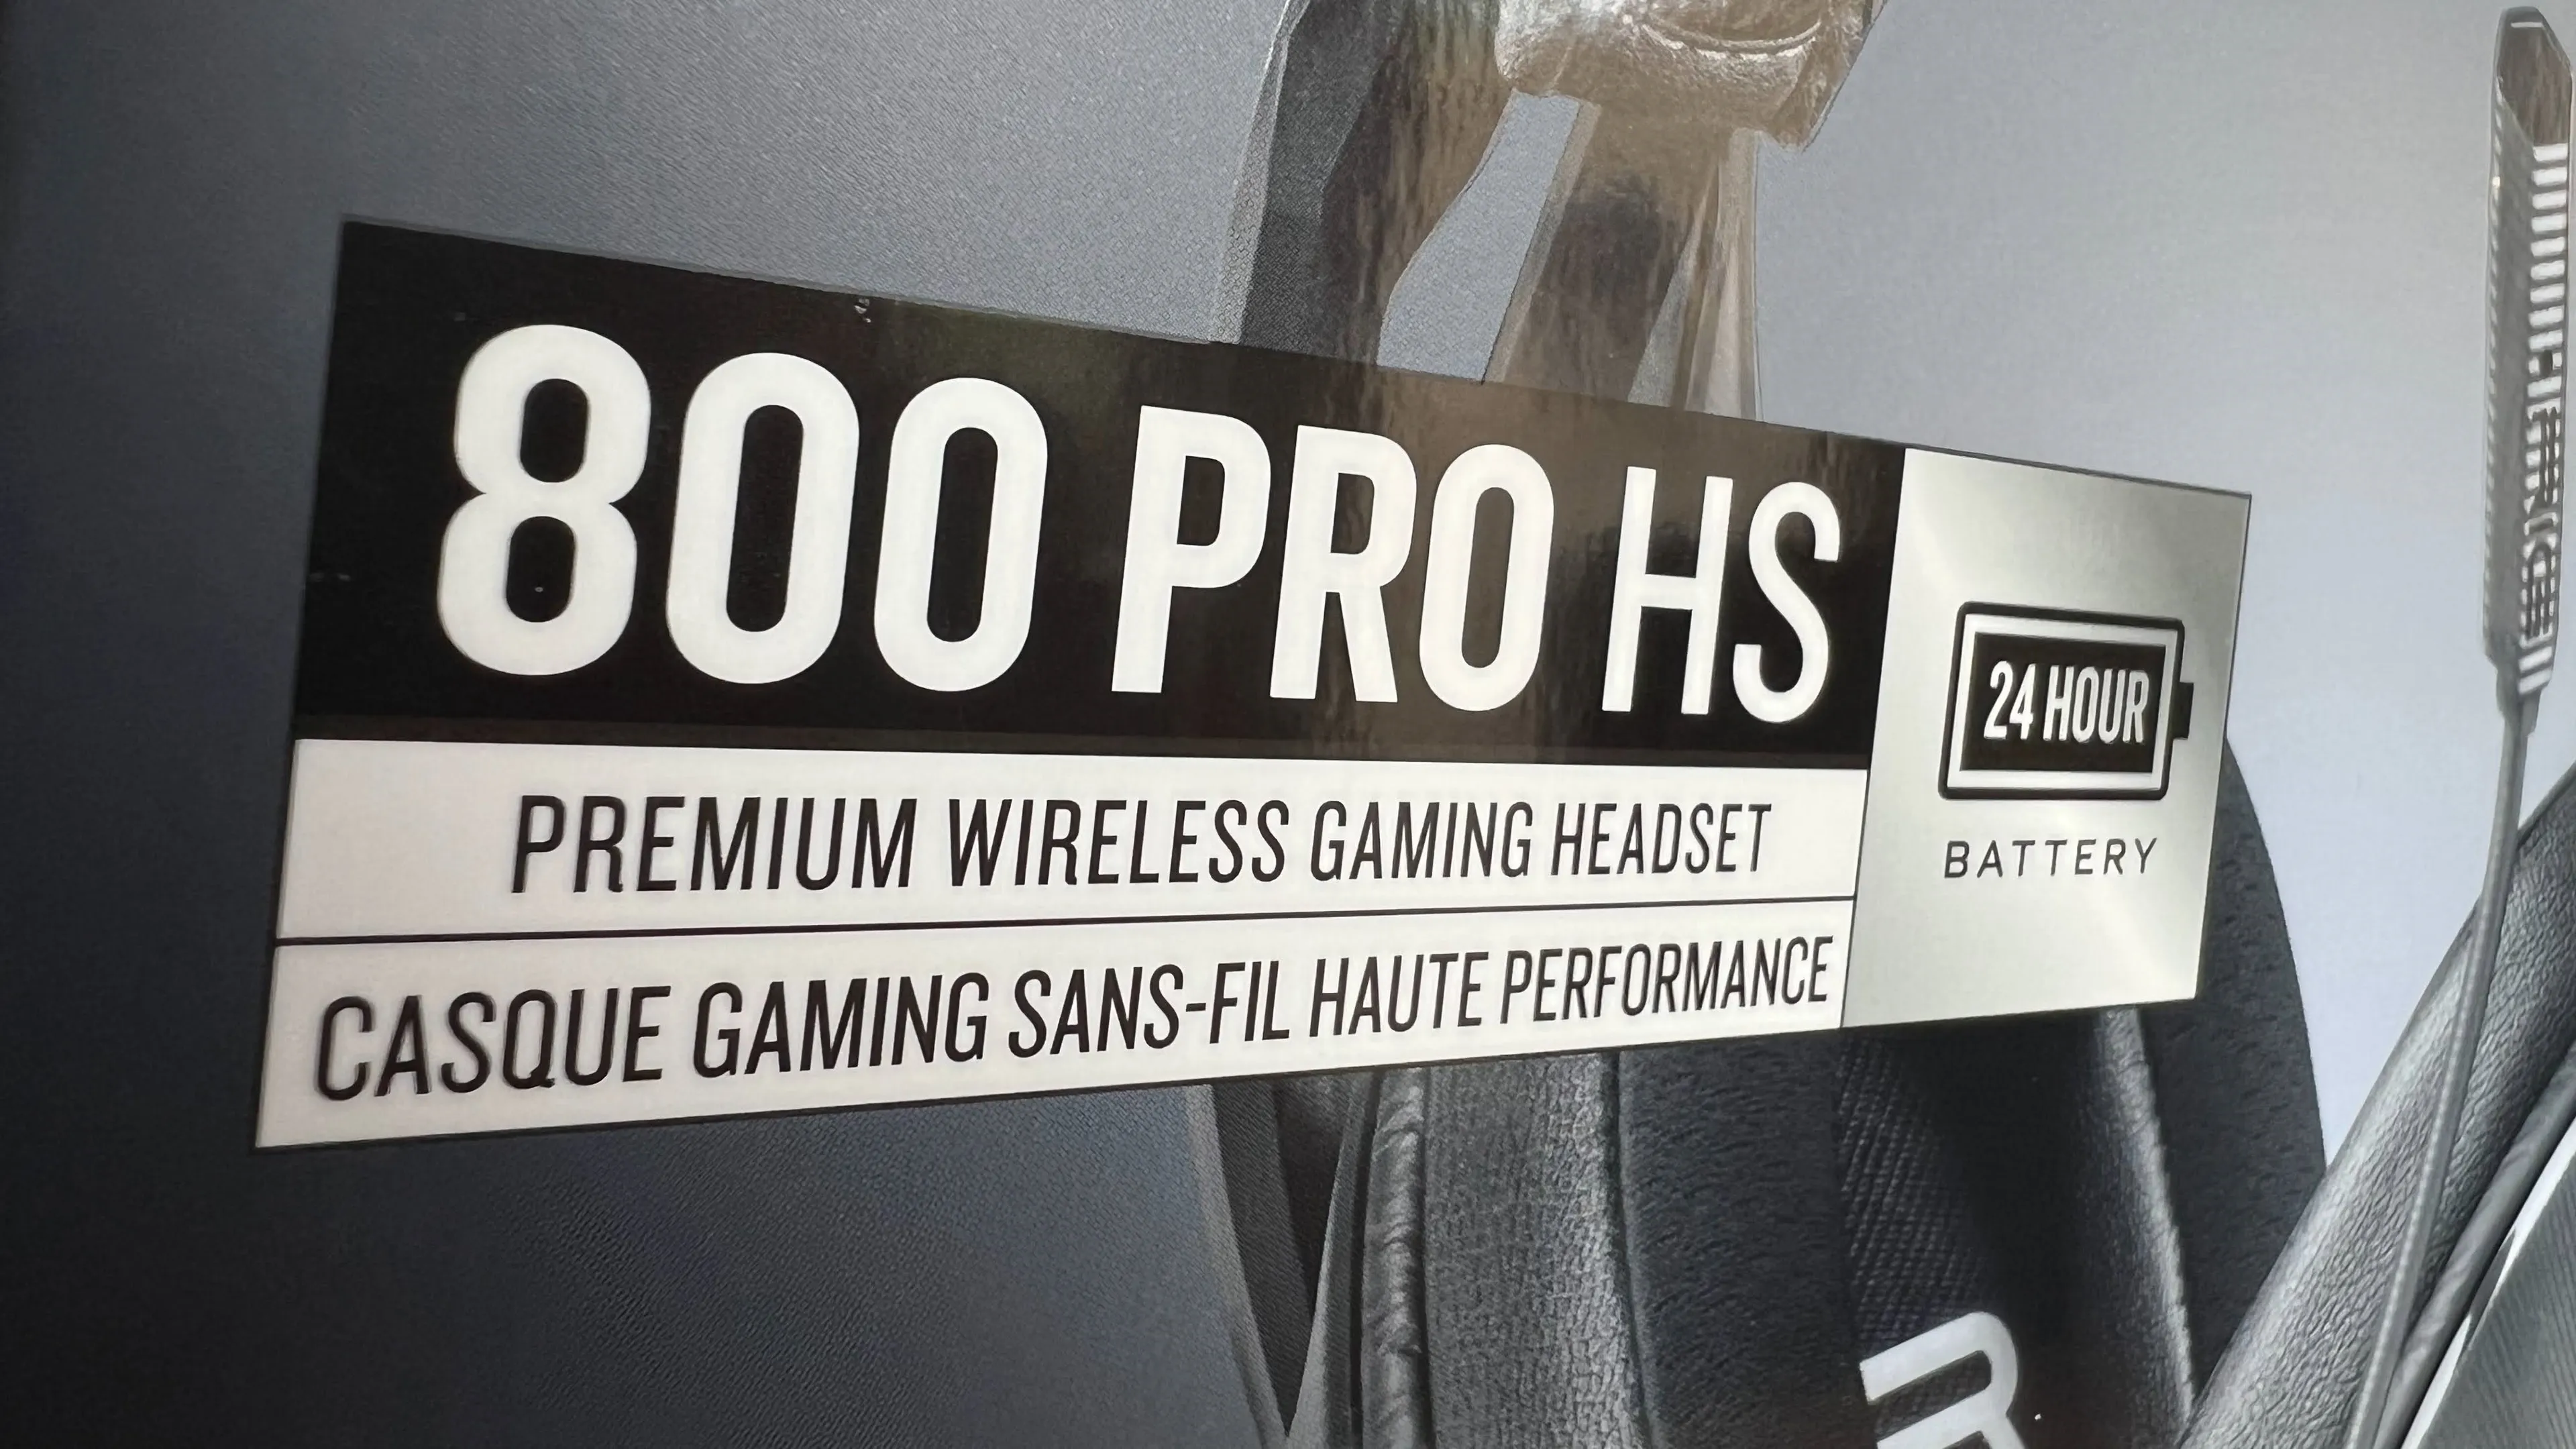 rig 800 pro hs headset review 1f1664550236